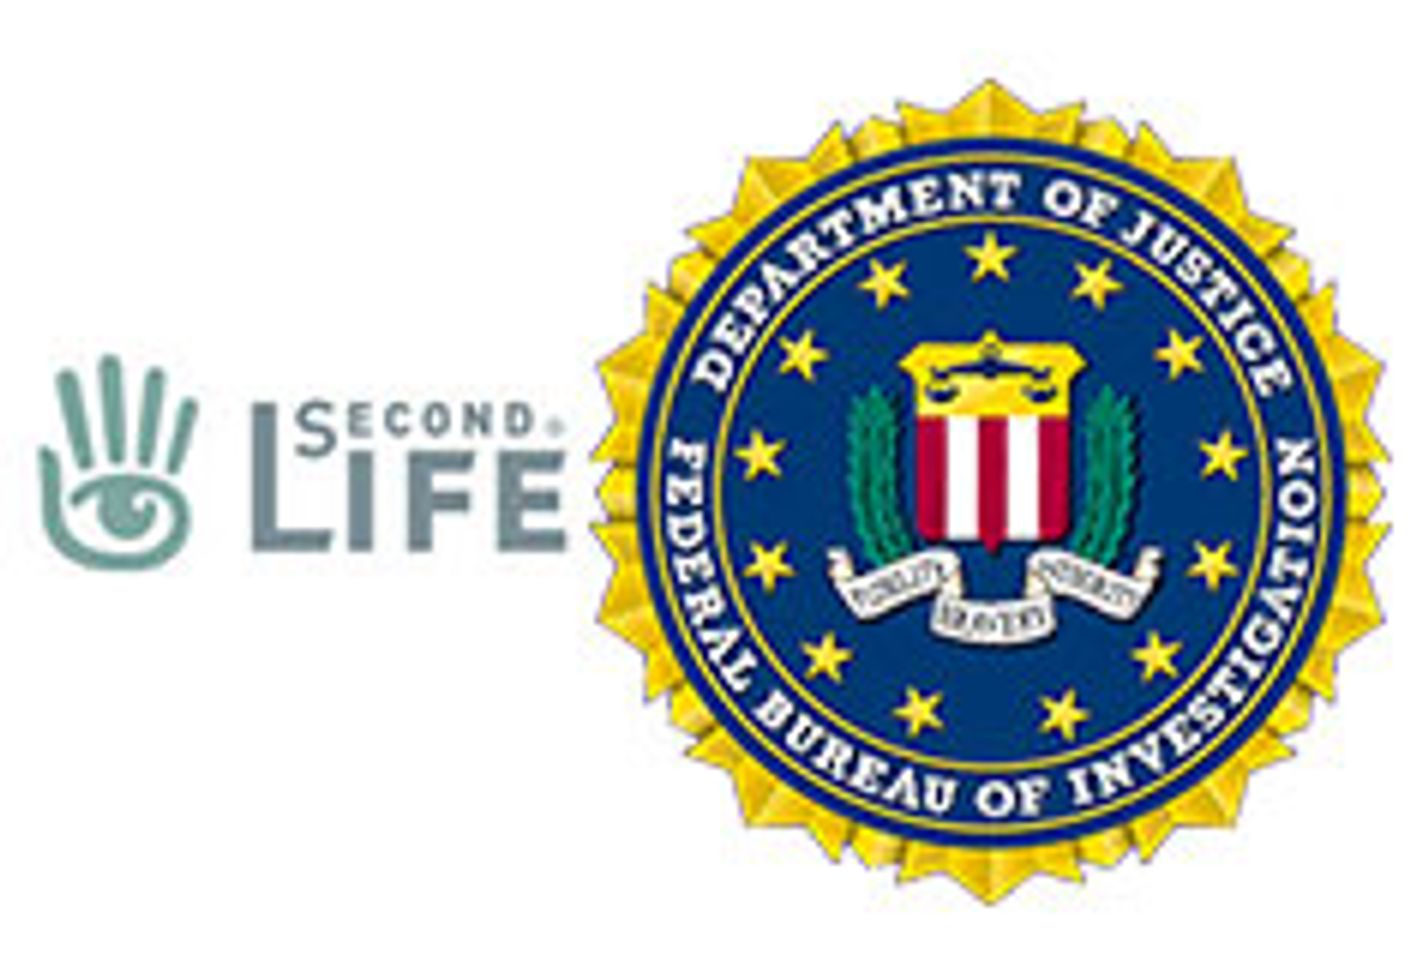 Feds Eye Gambling in Second Life